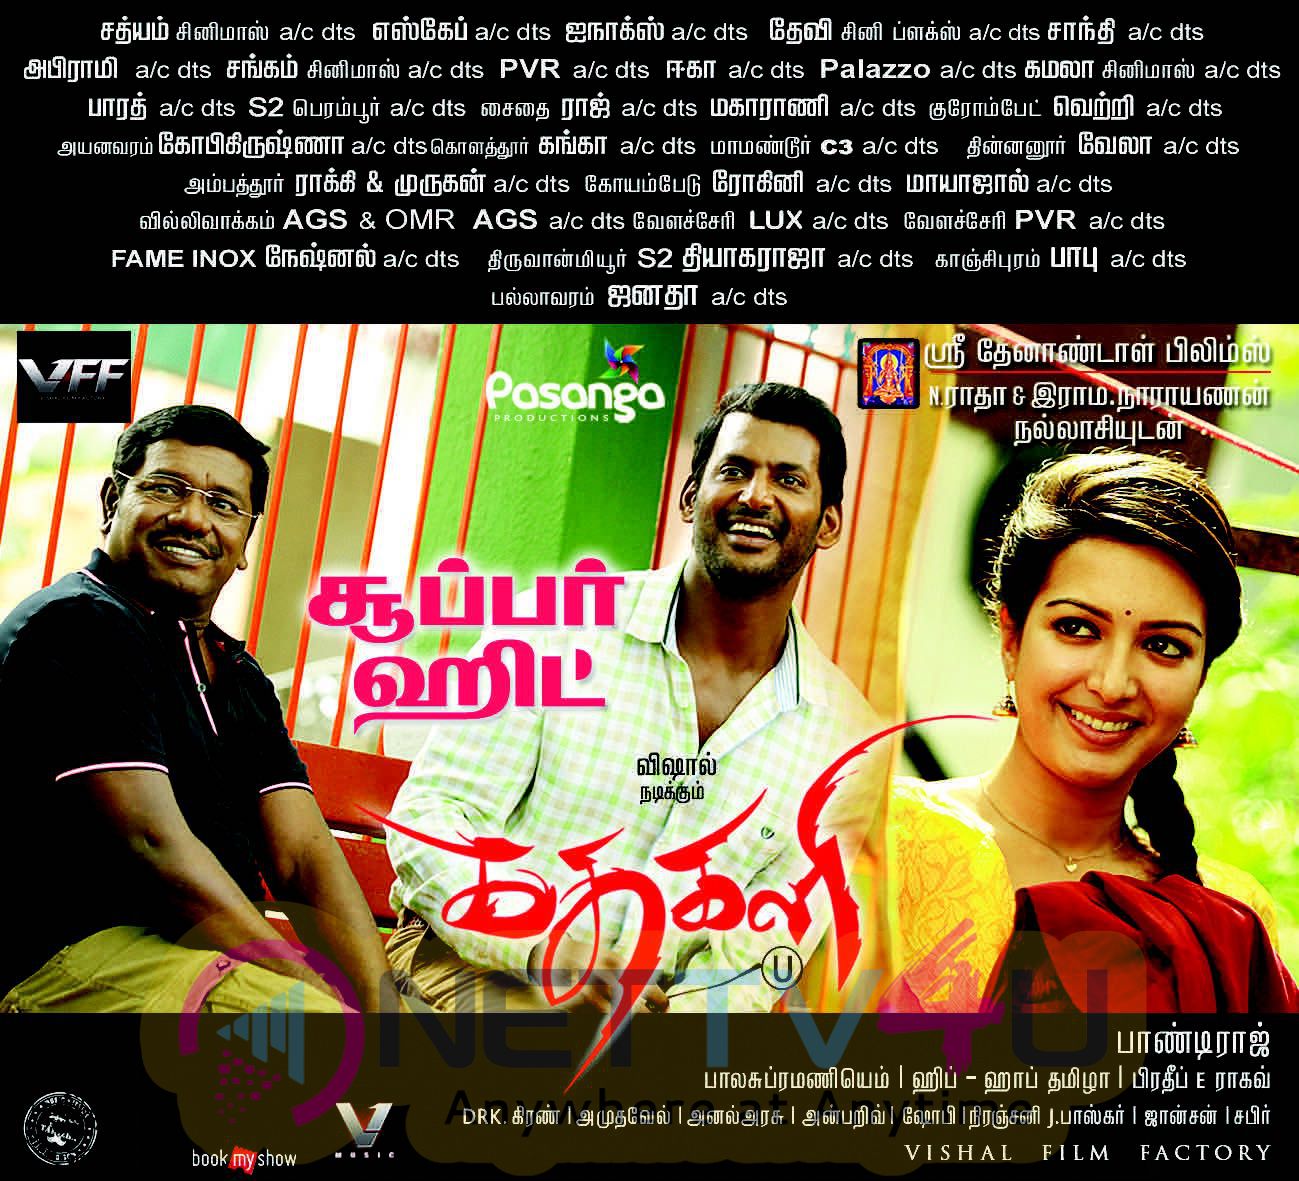 kathakali movie january 14th release poster 6